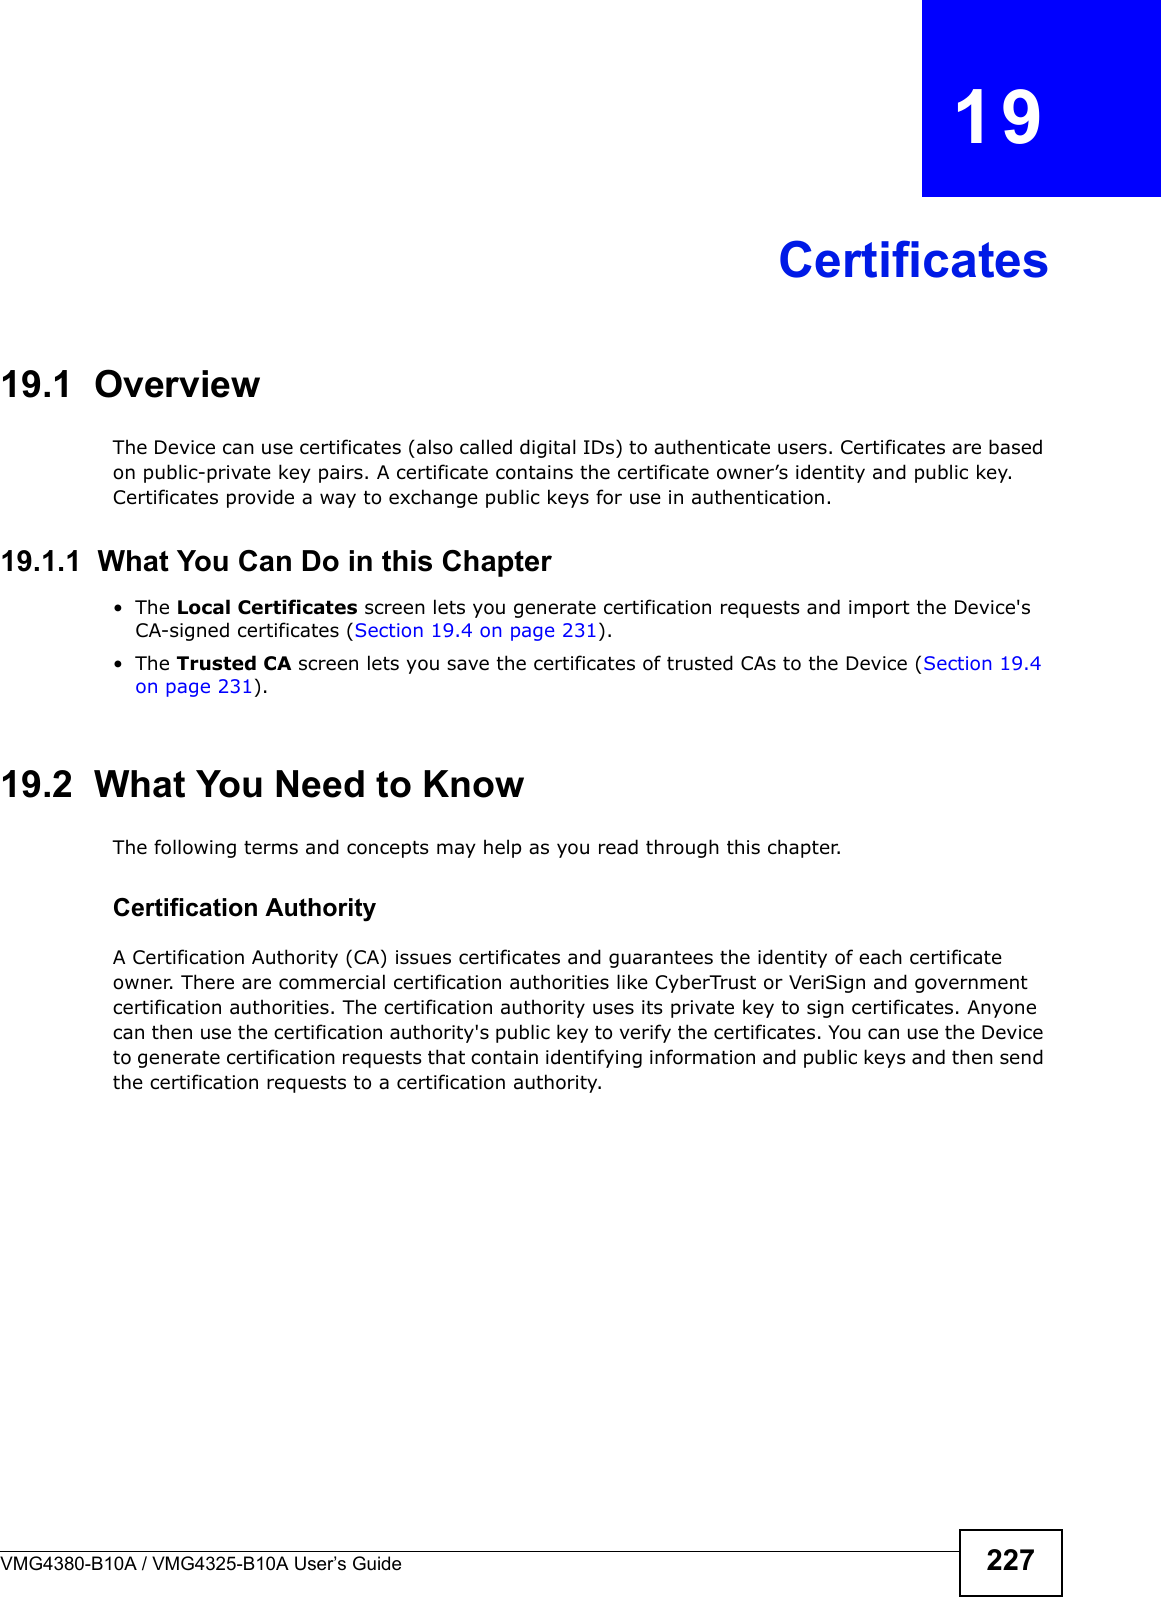 VMG4380-B10A / VMG4325-B10A User’s Guide 227CHAPTER  19Certificates19.1  OverviewThe Device can use certificates (also called digital IDs) to authenticate users. Certificates are based on public-private key pairs. A certificate contains the certificate owner’s identity and public key.Certificates provide a way to exchange public keys for use in authentication. 19.1.1  What You Can Do in this Chapter• The Local Certificates screen lets you generate certification requests and import the Device&apos;sCA-signed certificates (Section 19.4 on page 231).• The Trusted CA screen lets you save the certificates of trusted CAs to the Device (Section 19.4on page 231).19.2  What You Need to KnowThe following terms and concepts may help as you read through this chapter.Certification Authority A Certification Authority (CA) issues certificates and guarantees the identity of each certificate owner. There are commercial certification authorities like CyberTrust or VeriSign and government certification authorities. The certification authority uses its private key to sign certificates. Anyone can then use the certification authority&apos;s public key to verify the certificates. You can use the Device to generate certification requests that contain identifying information and public keys and then send the certification requests to a certification authority.